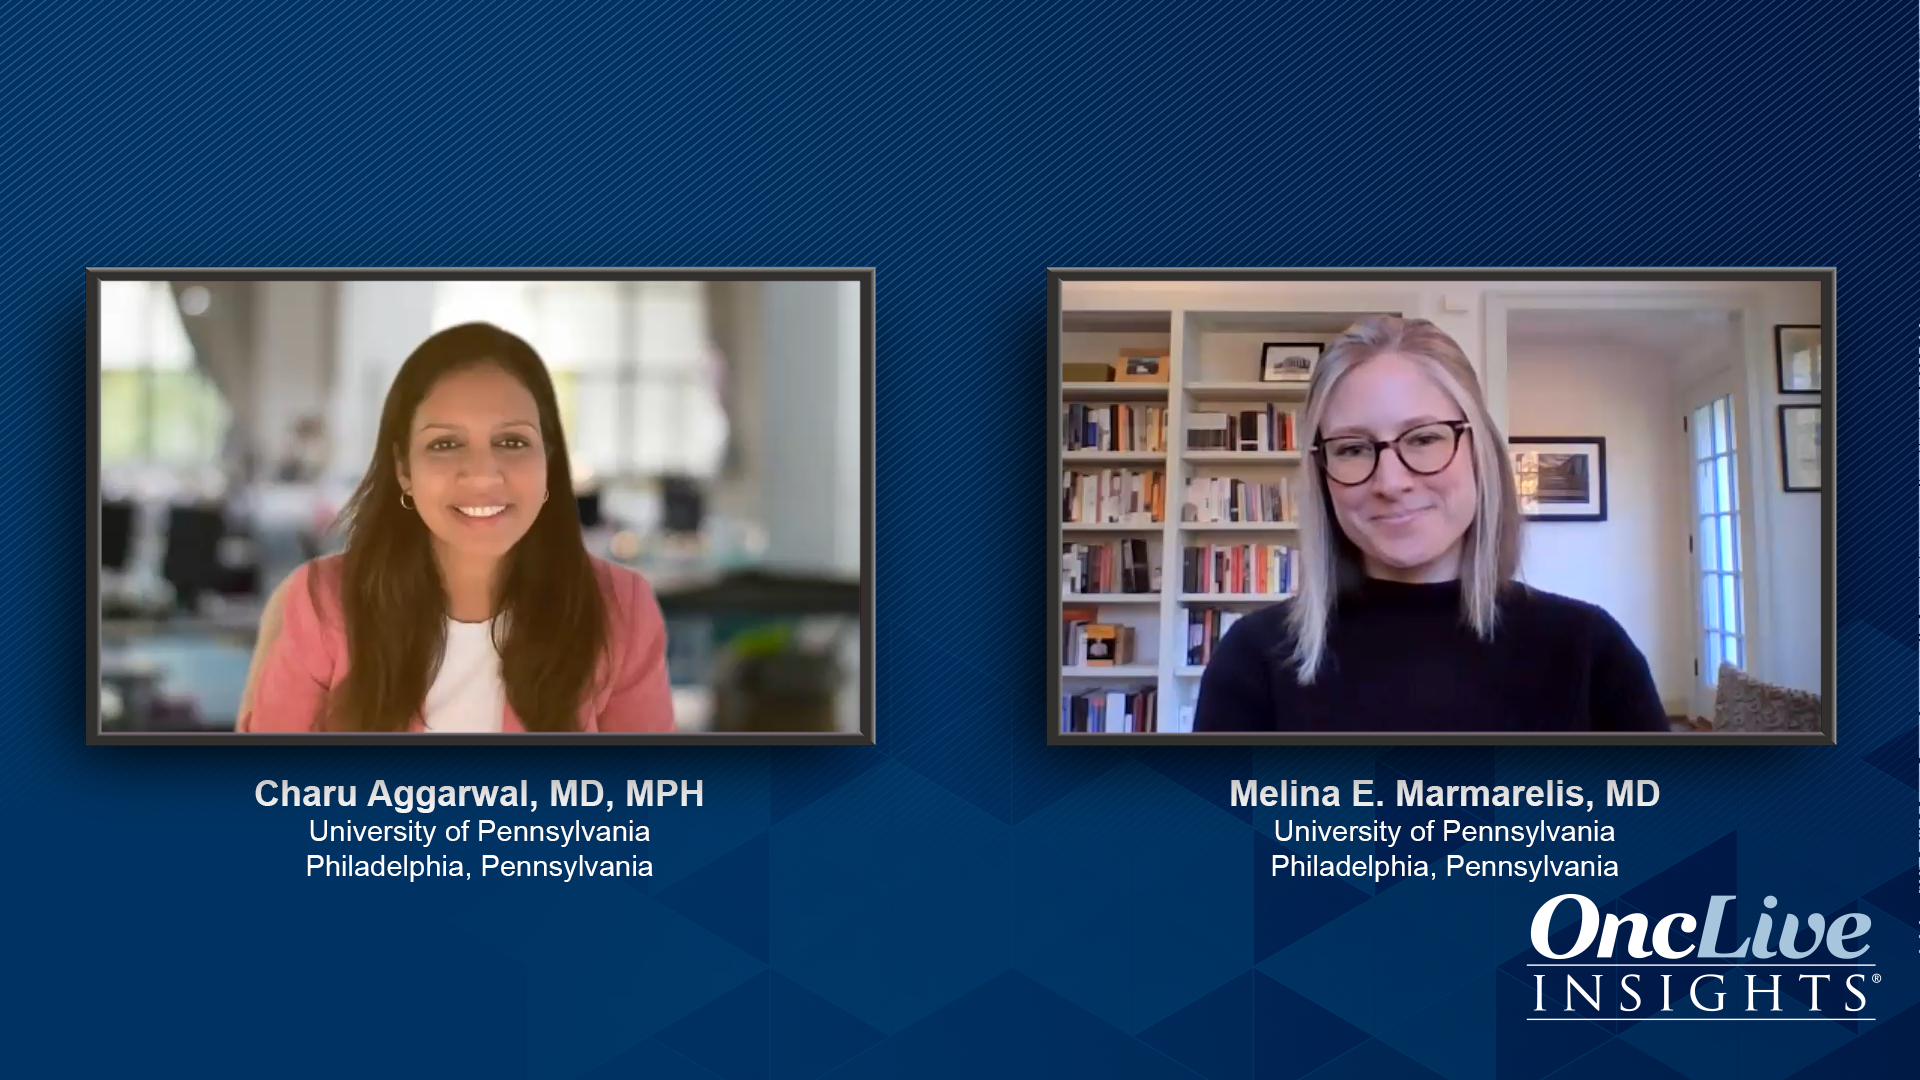 Charu Aggarwal, MD, MPH, and Melina E. Marmarelis, MD, experts on lung cancer